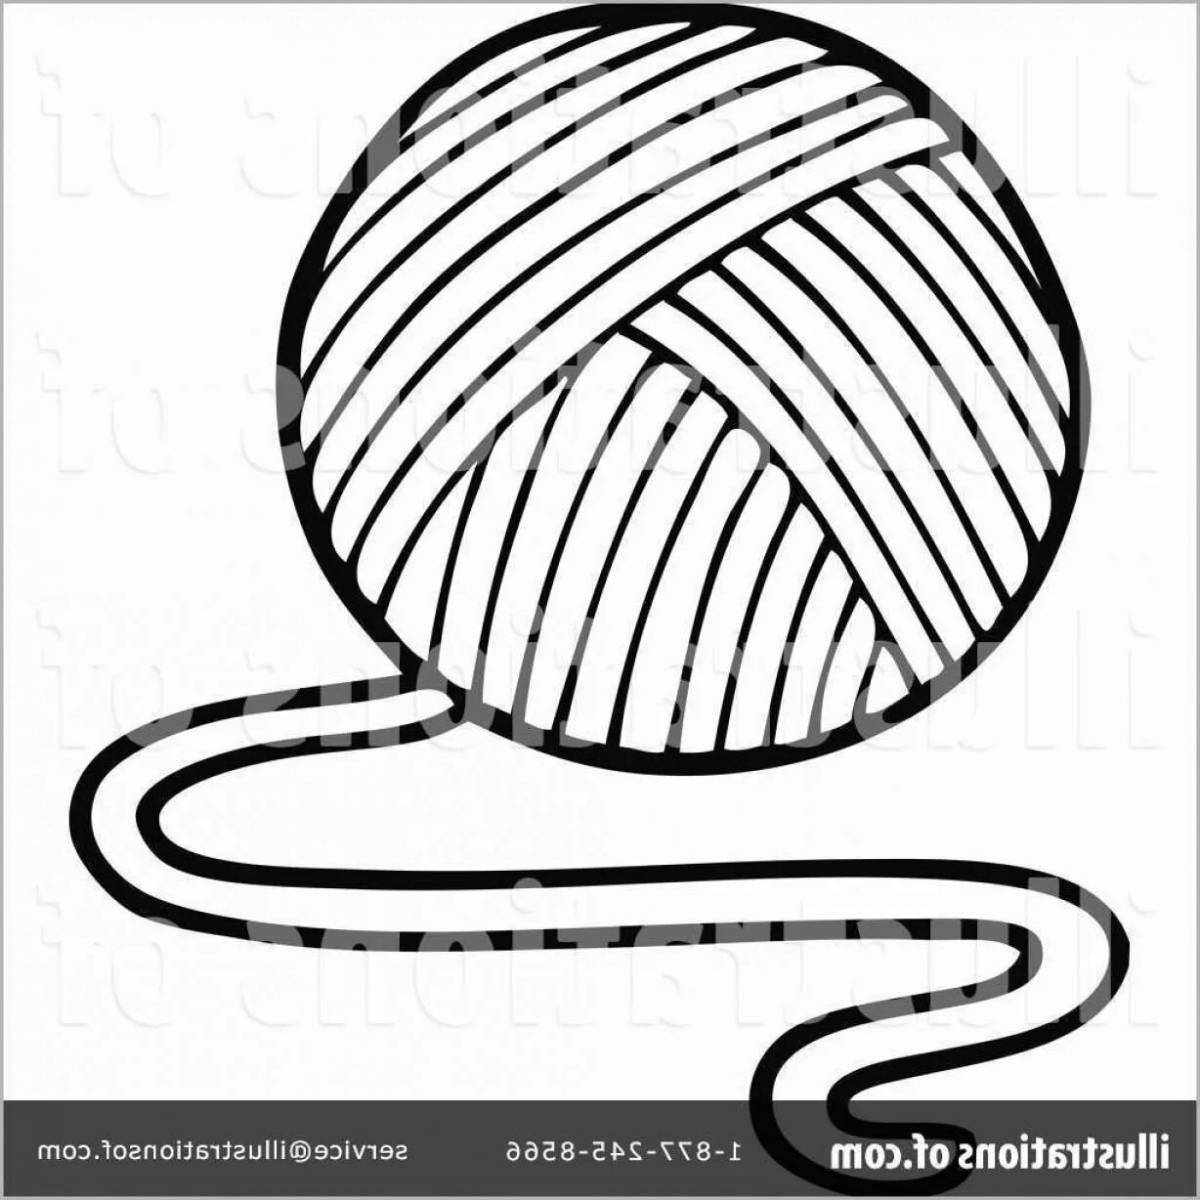 Coloring page charming ball of thread